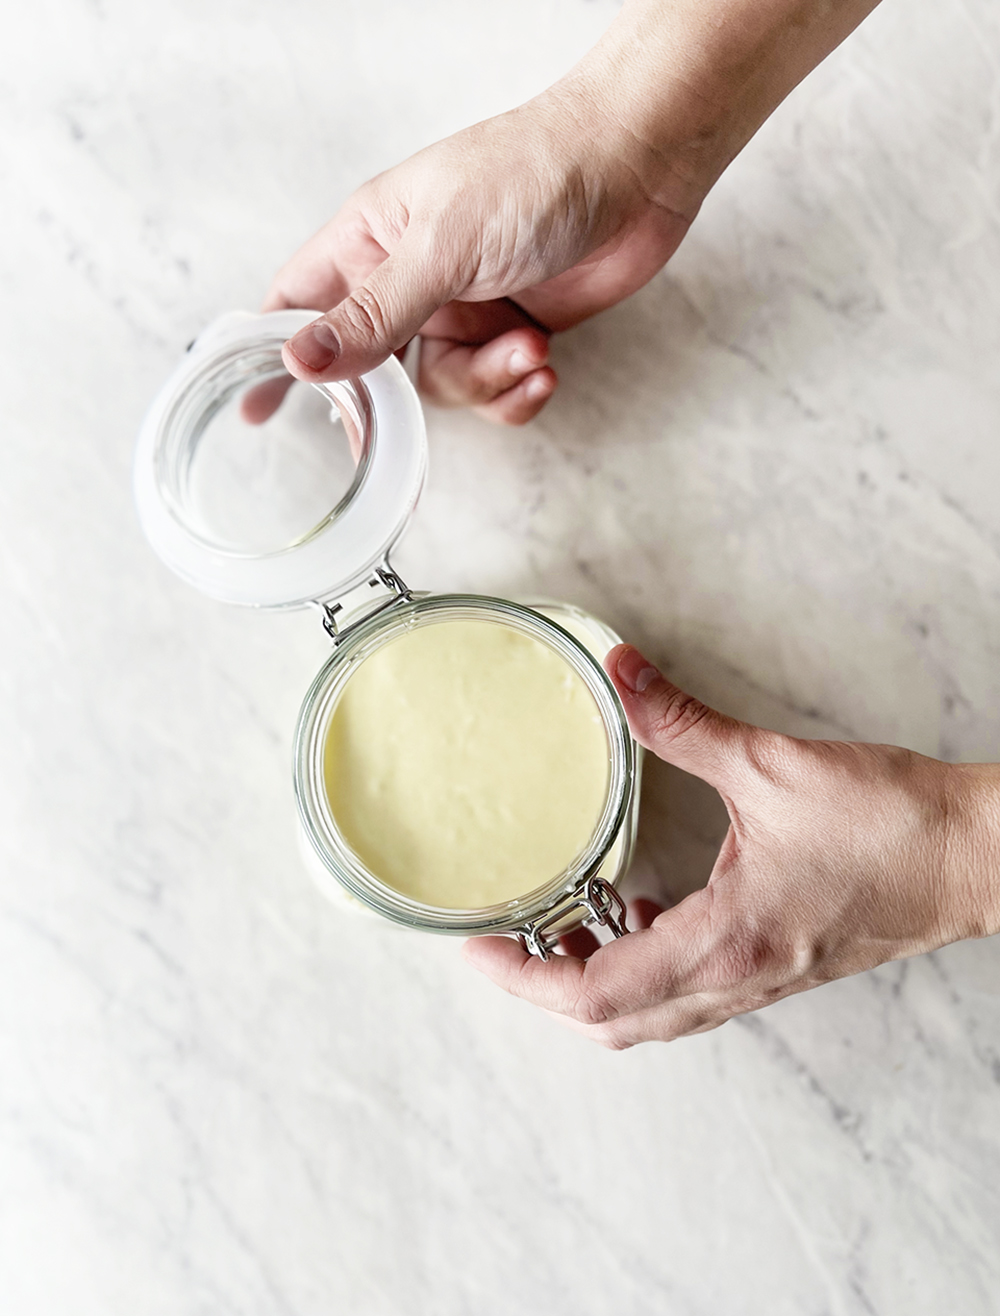 Another edition of Wellness Wednesday and I am sharing with you a homemade garlic salve recipe that comes in so handy with colds, coughs, and other ailments. I love having this on hand to reach for. Head to KaraLayne.com to get the full recipe and learn more!